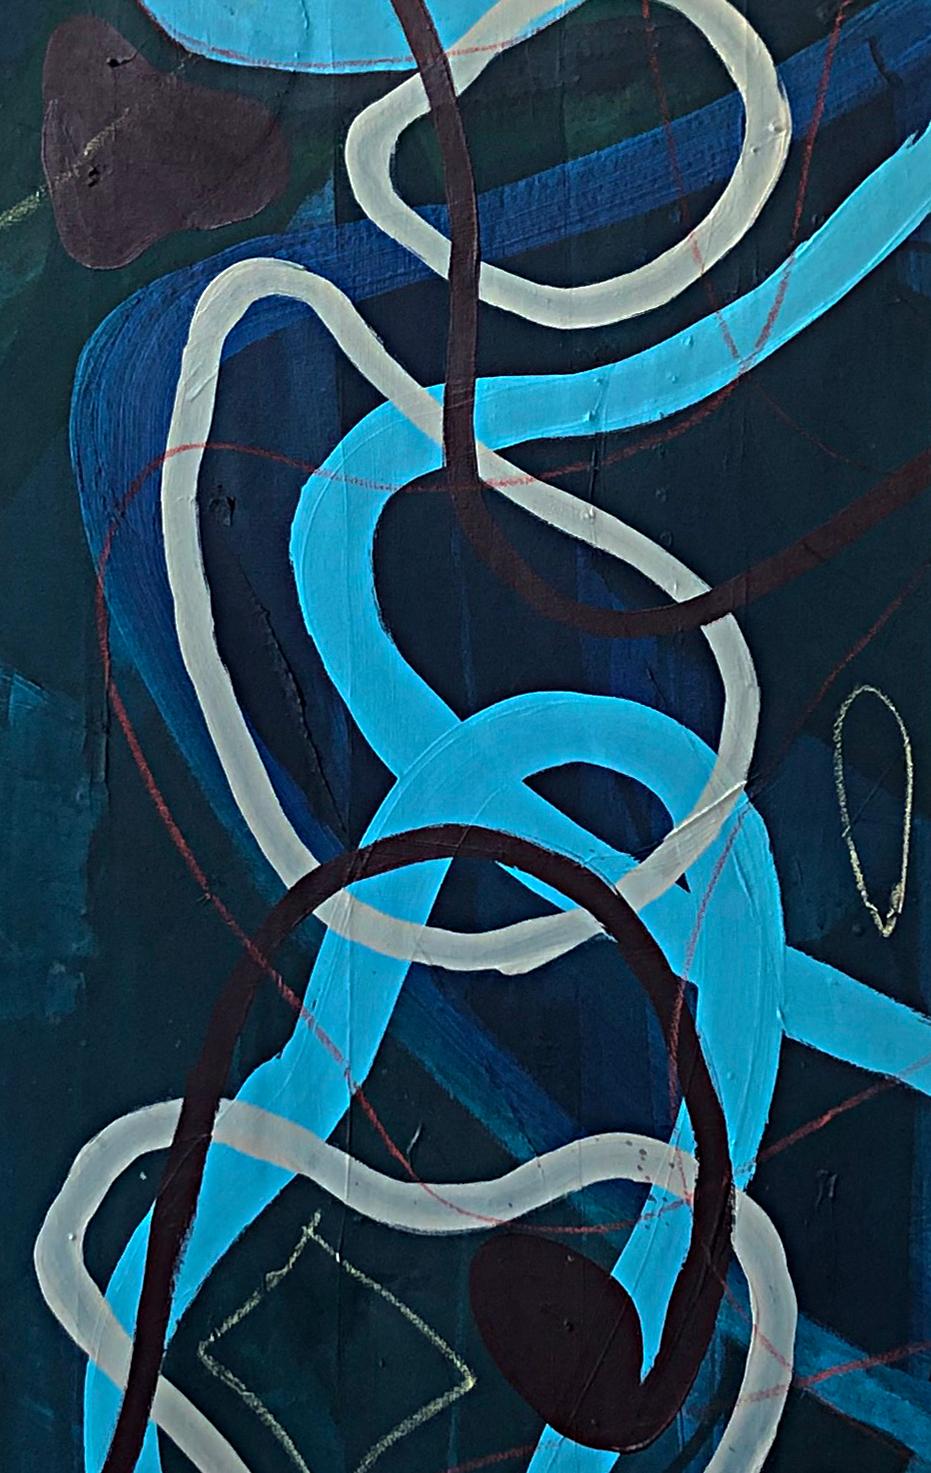 Circuito #16-A, by Alec Franco
From The Series Circuito 
Acrylic, pastel, and asphalt paint on canvas  
Image Size: 185 cm H X 45 cm W
Signed by artist
Mix media on canvas  
2019
_______
The artist's works are based on time and on informal aesthetic